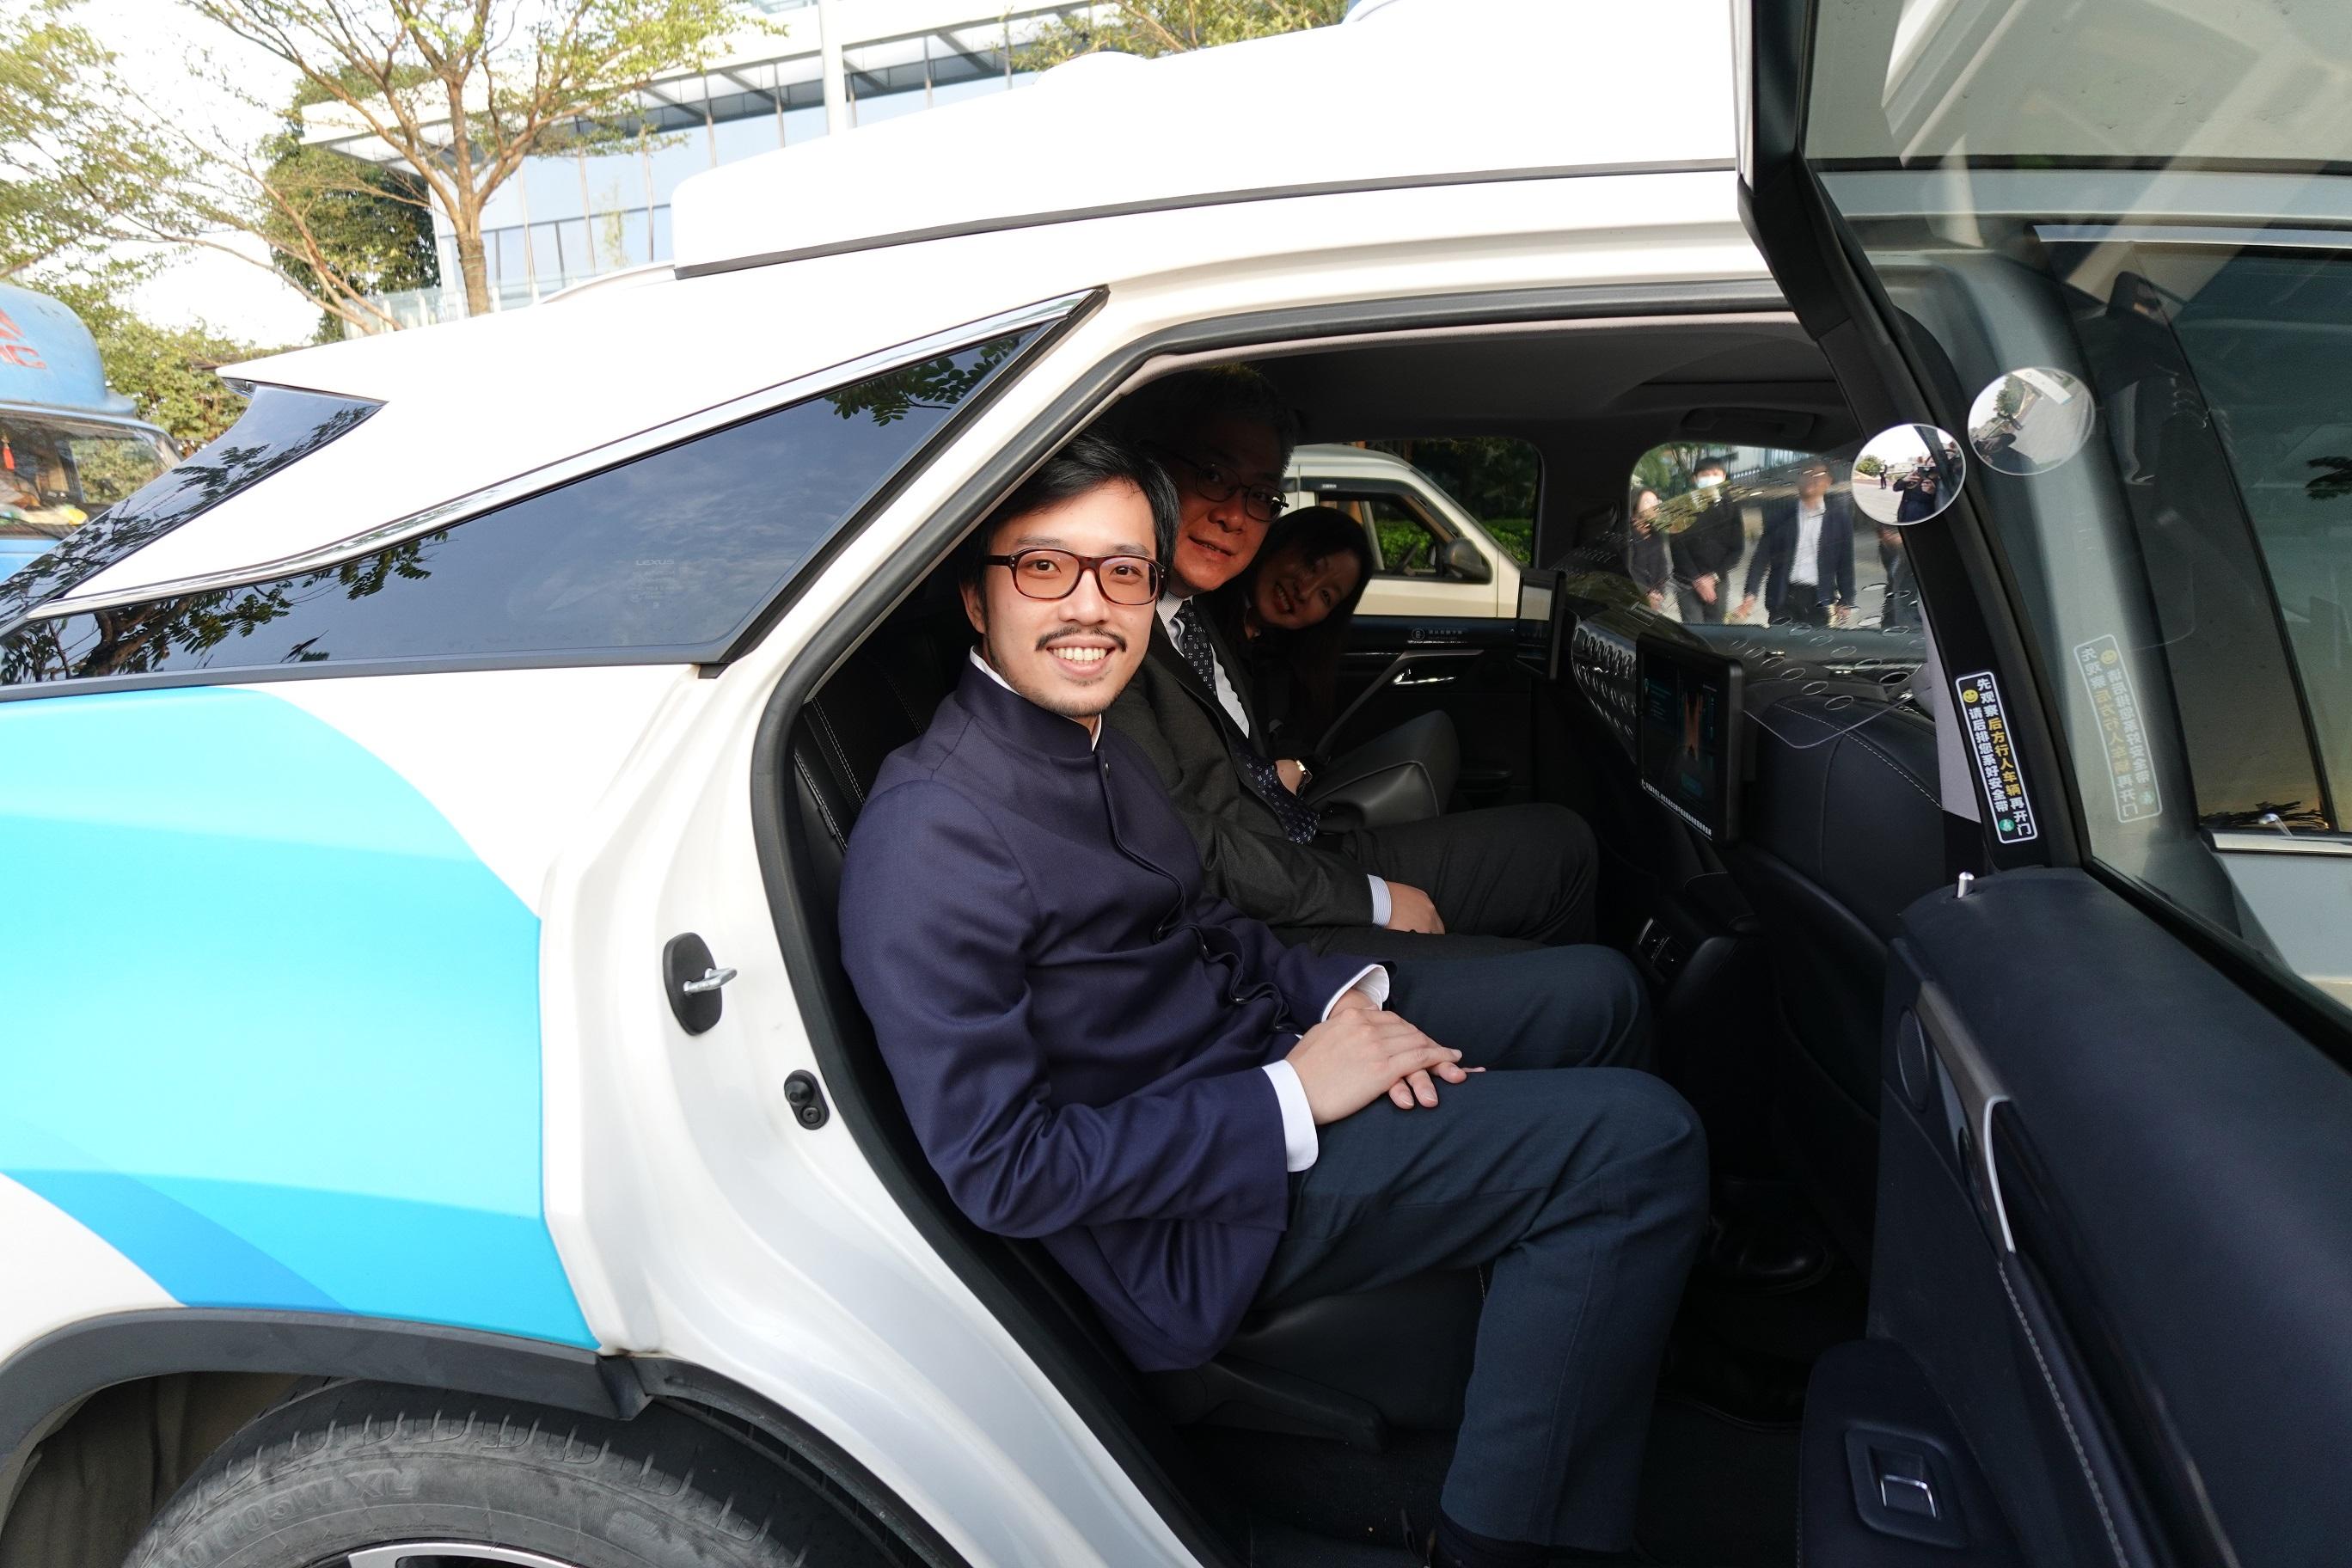 The business delegation of enterprises of Belt and Road countries operating in Hong Kong, led by the Secretary for Commerce and Economic Development, Mr Algernon Yau, continued the visit to the Guangdong-Hong Kong-Macao Greater Bay Area today (December 5). The delegation visited Pony.ai, an autonomous driving start-up in Nansha District, Guangzhou. Photo shows the Commissioner for Belt and Road, Mr Nicholas Ho (left), and the Director of the Hong Kong Economic and Trade Office in Guangdong, Miss Linda So (right), experiencing first-hand its self-developed autonomous saloon car.